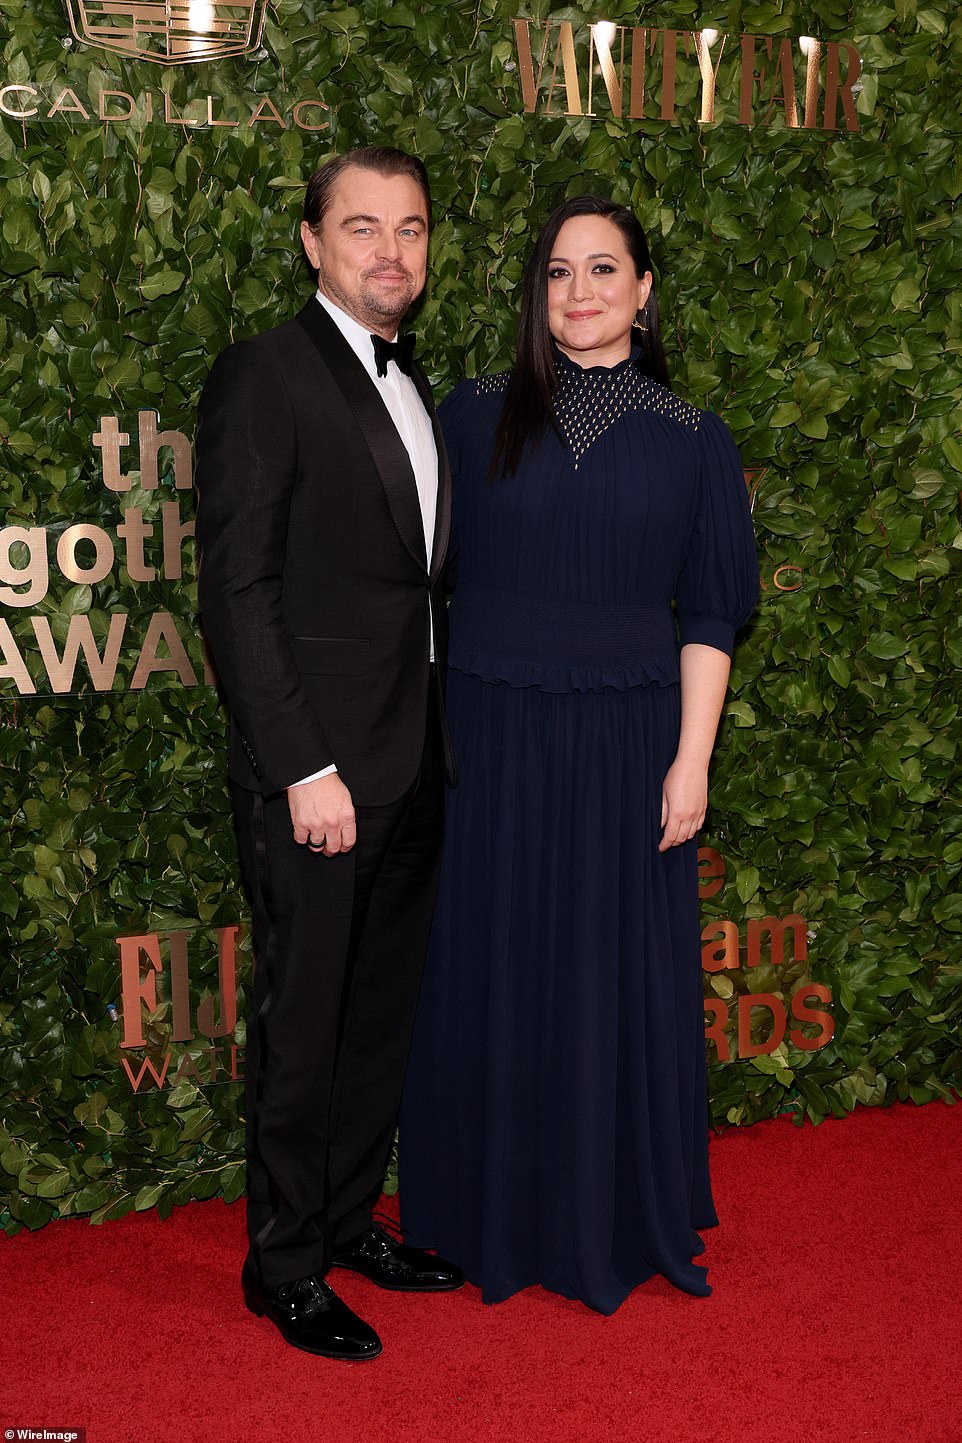 A-list attendees: Leonardo DiCaprio posed for a photo with Lily Gladstone, who is nominated for Outstanding Lead Performance for her role in The Unknown Country